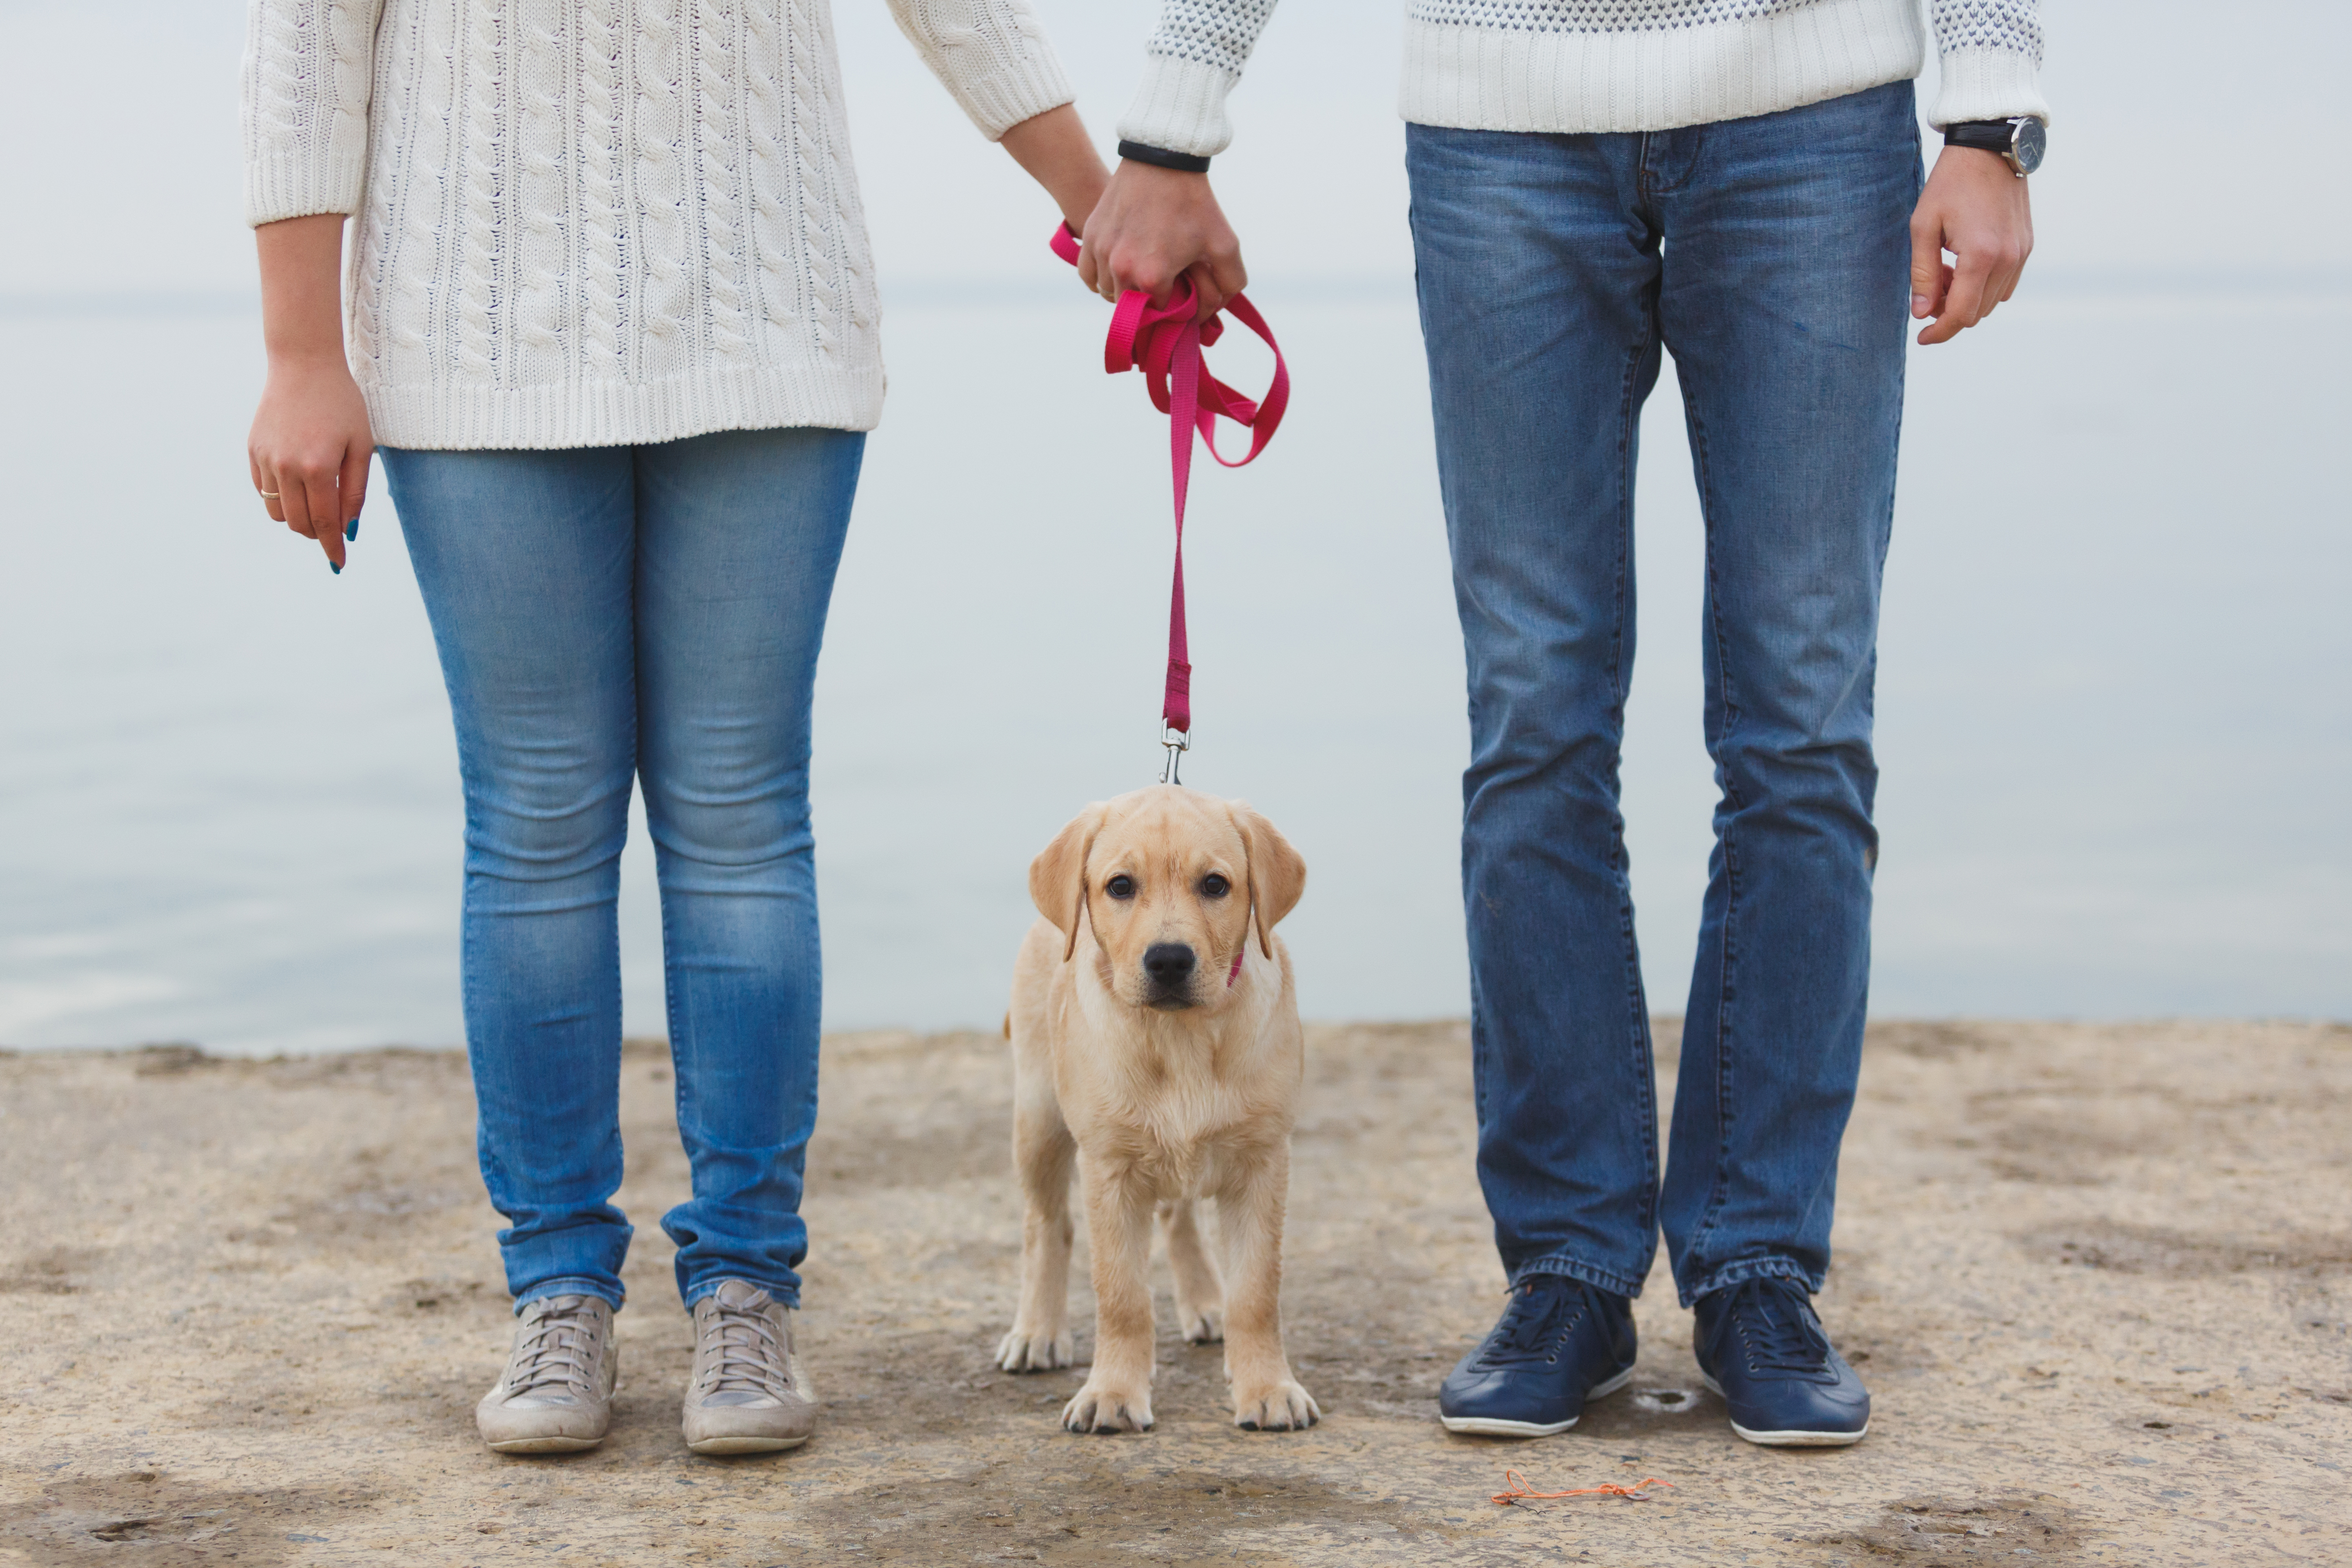 Couple standing with dog on leash